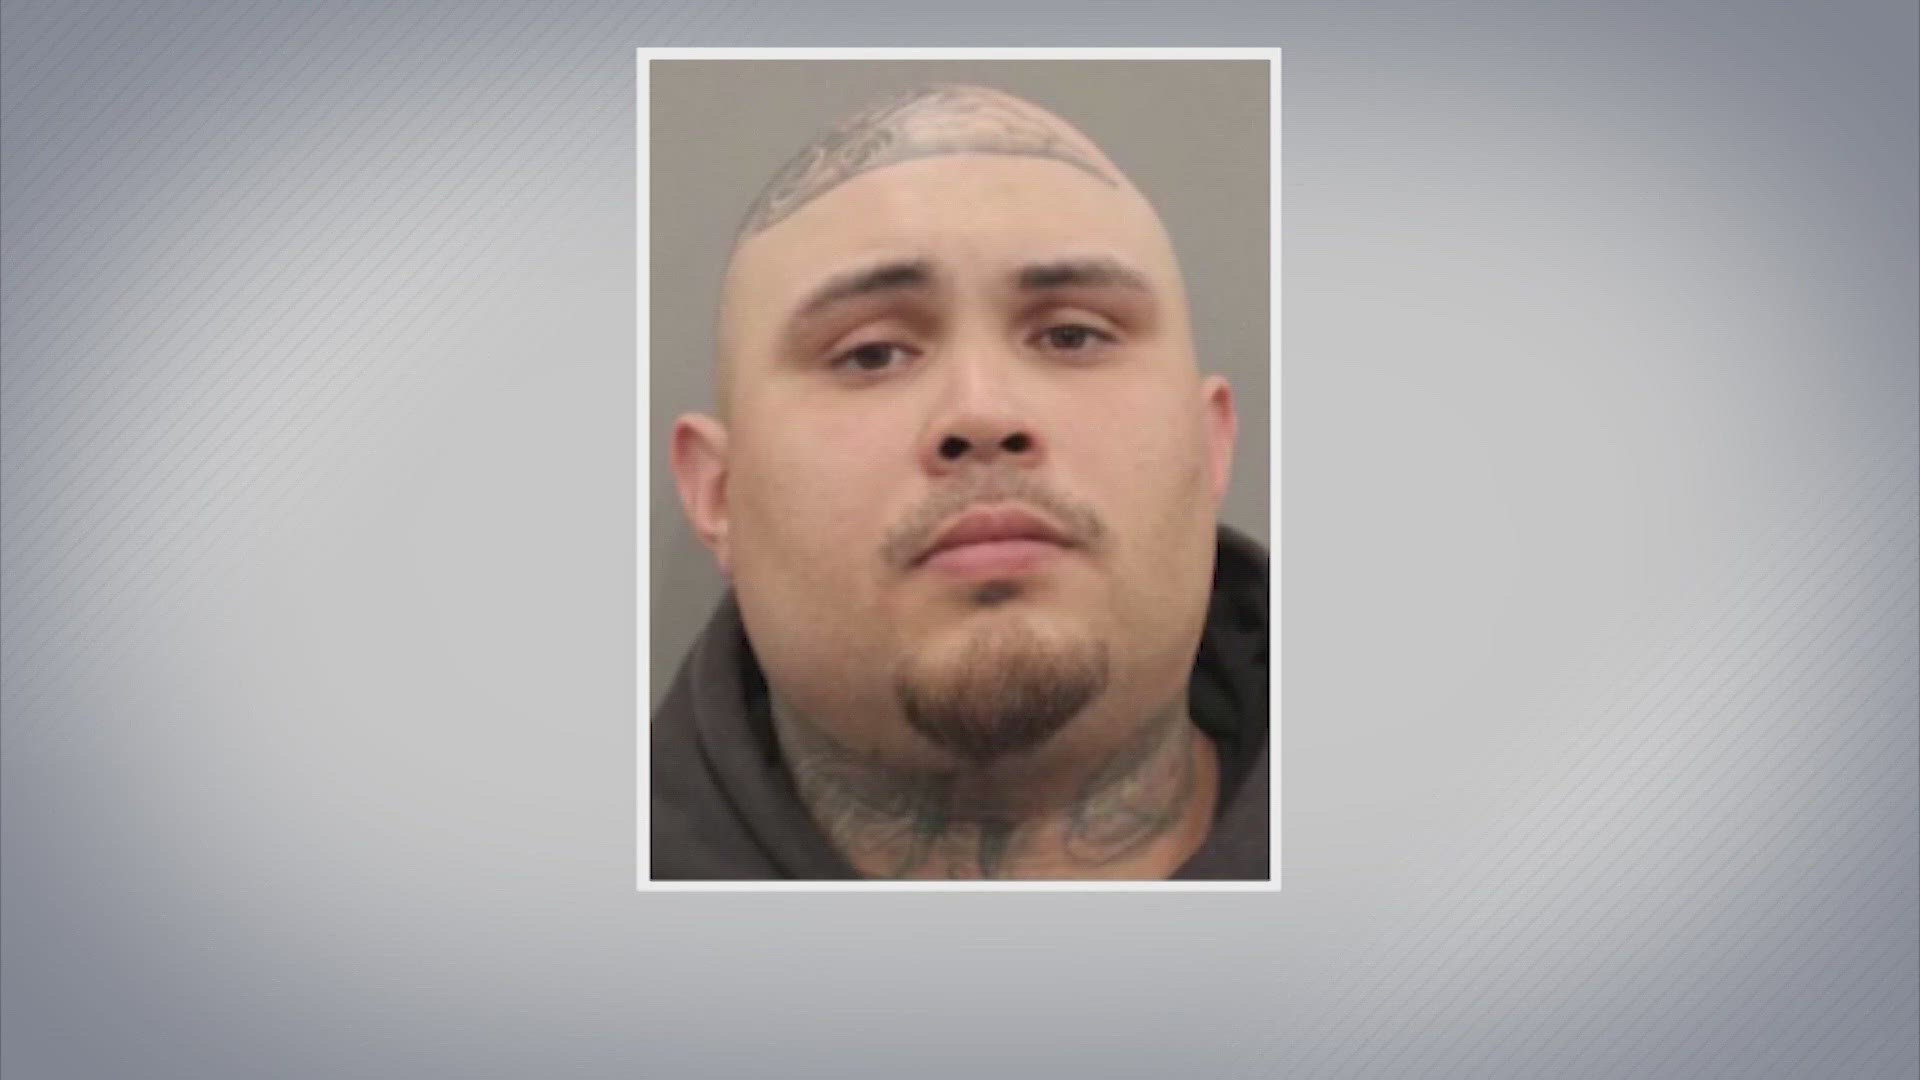 Terry Bryan Rivera, 27, is charged with capital murder in the shooting death of 12-year-old Carlos Fernandez.